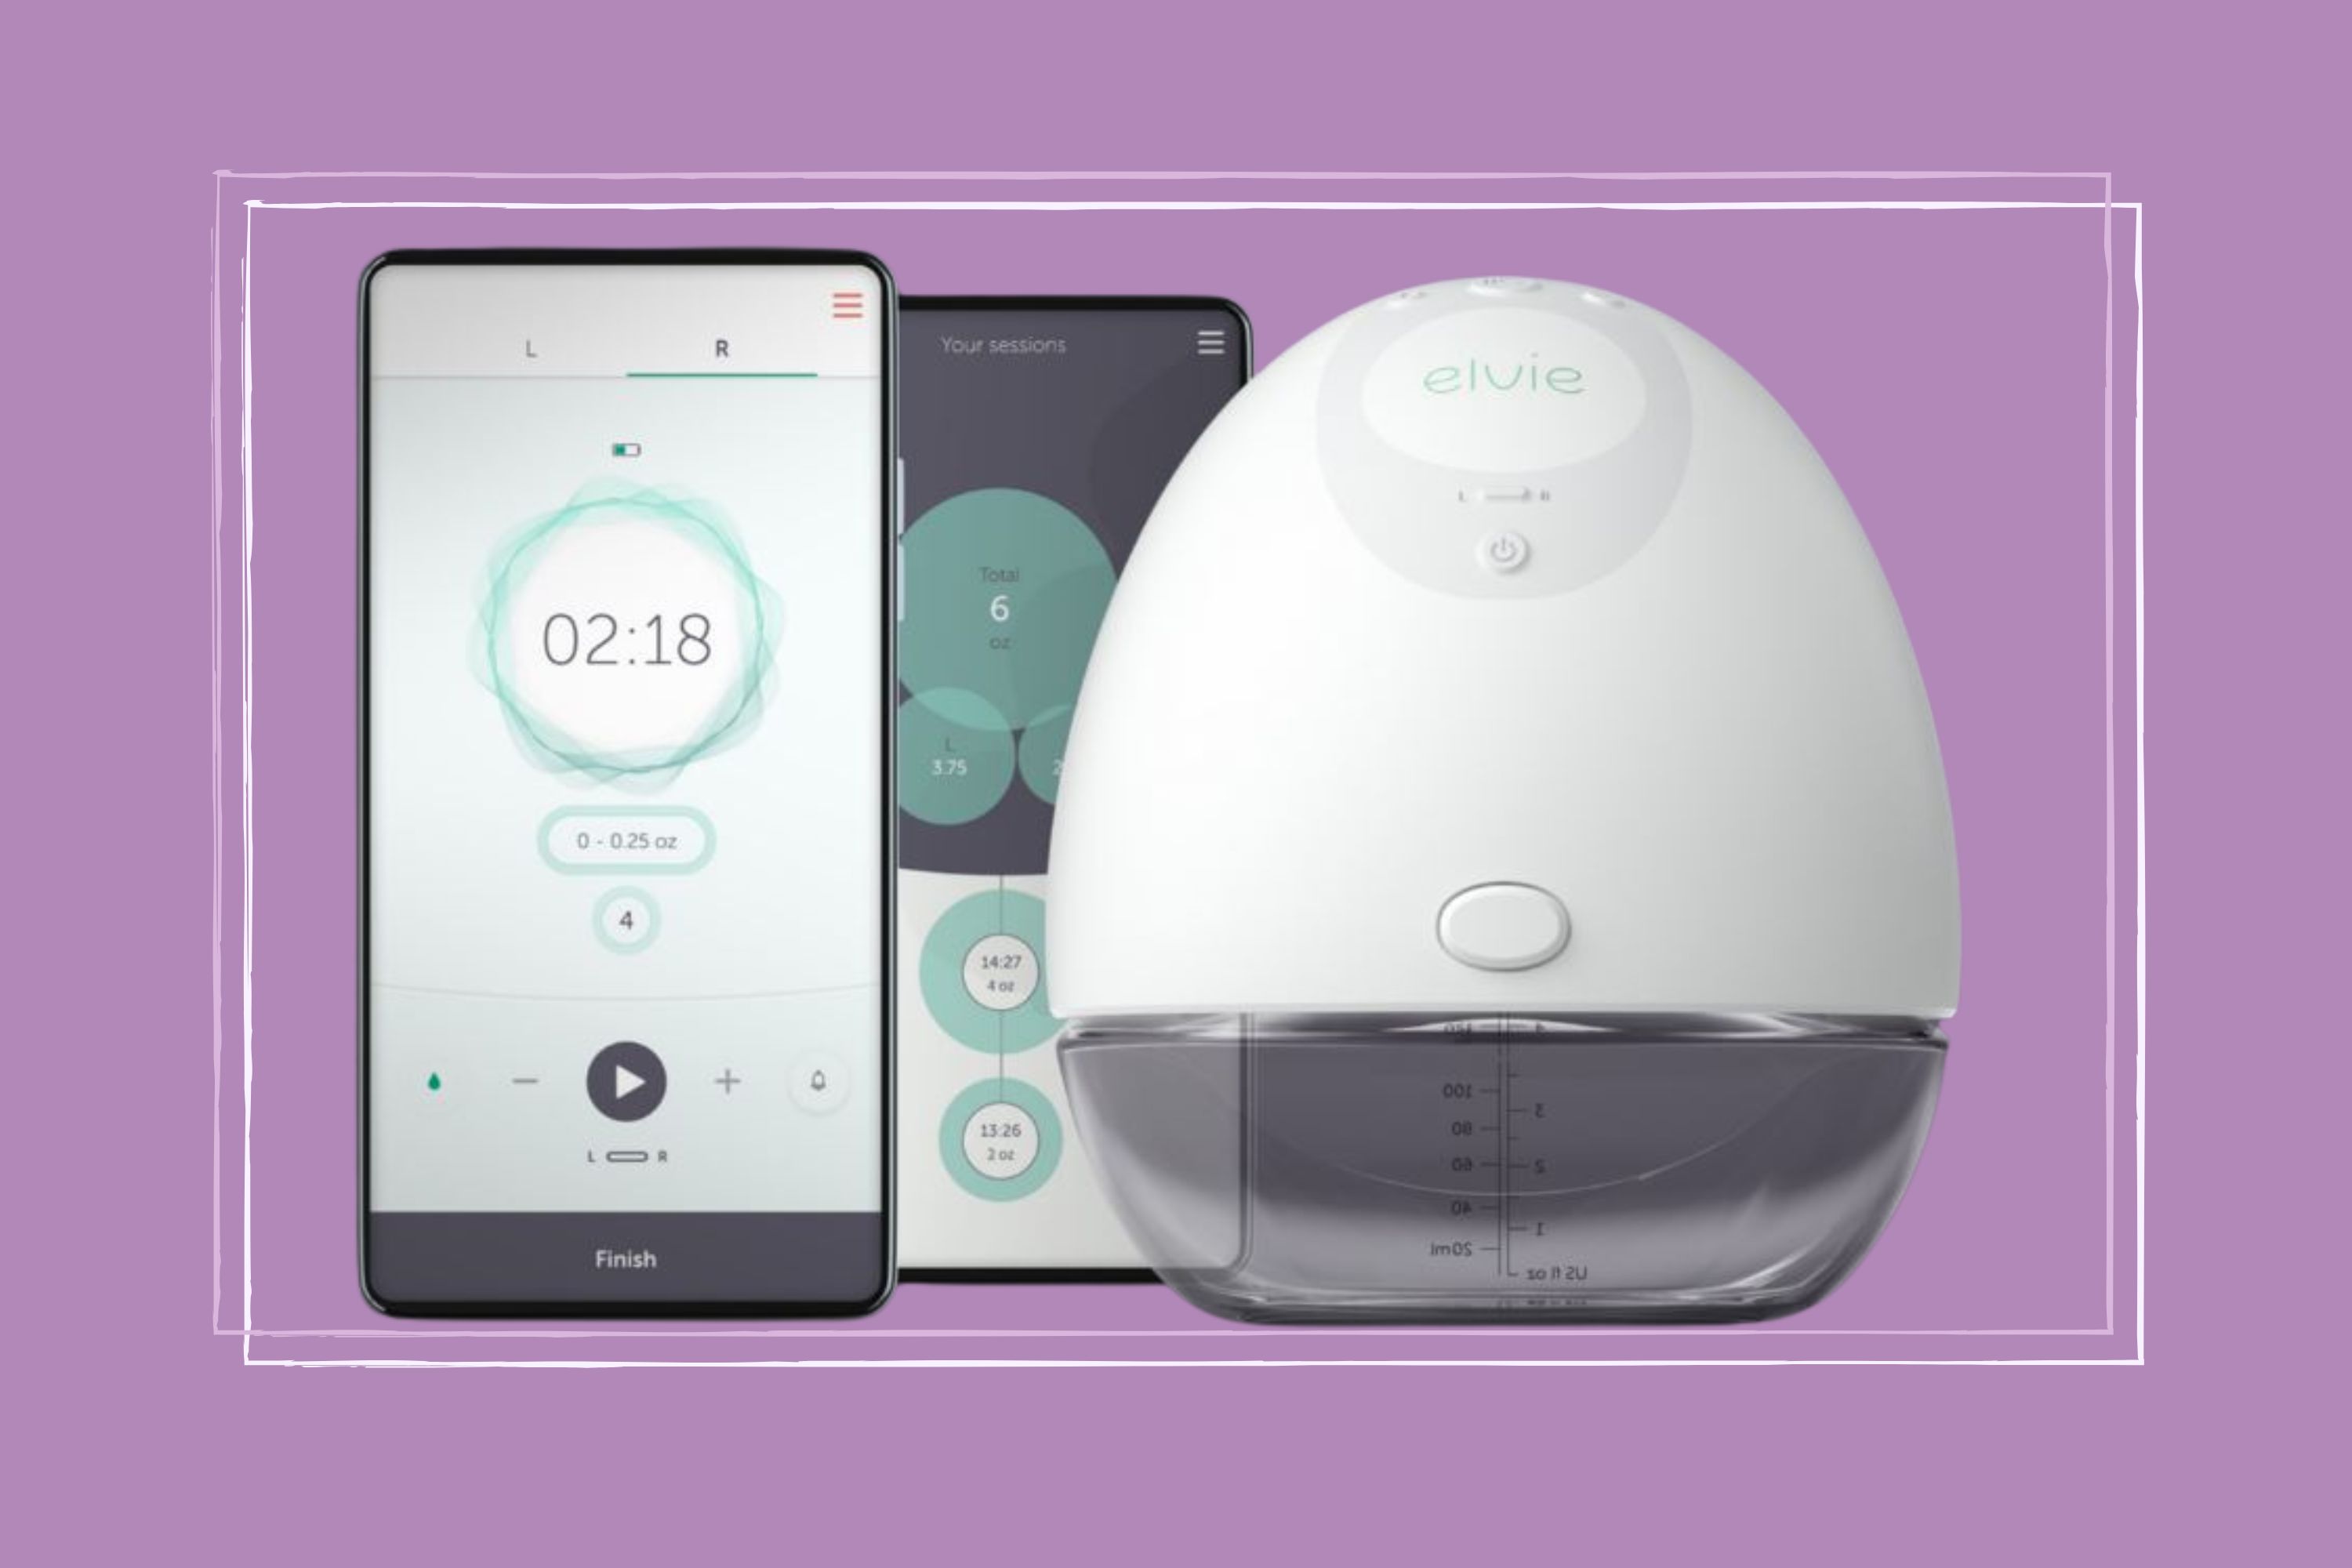 The Elvie breast pump is a good product that you might not need